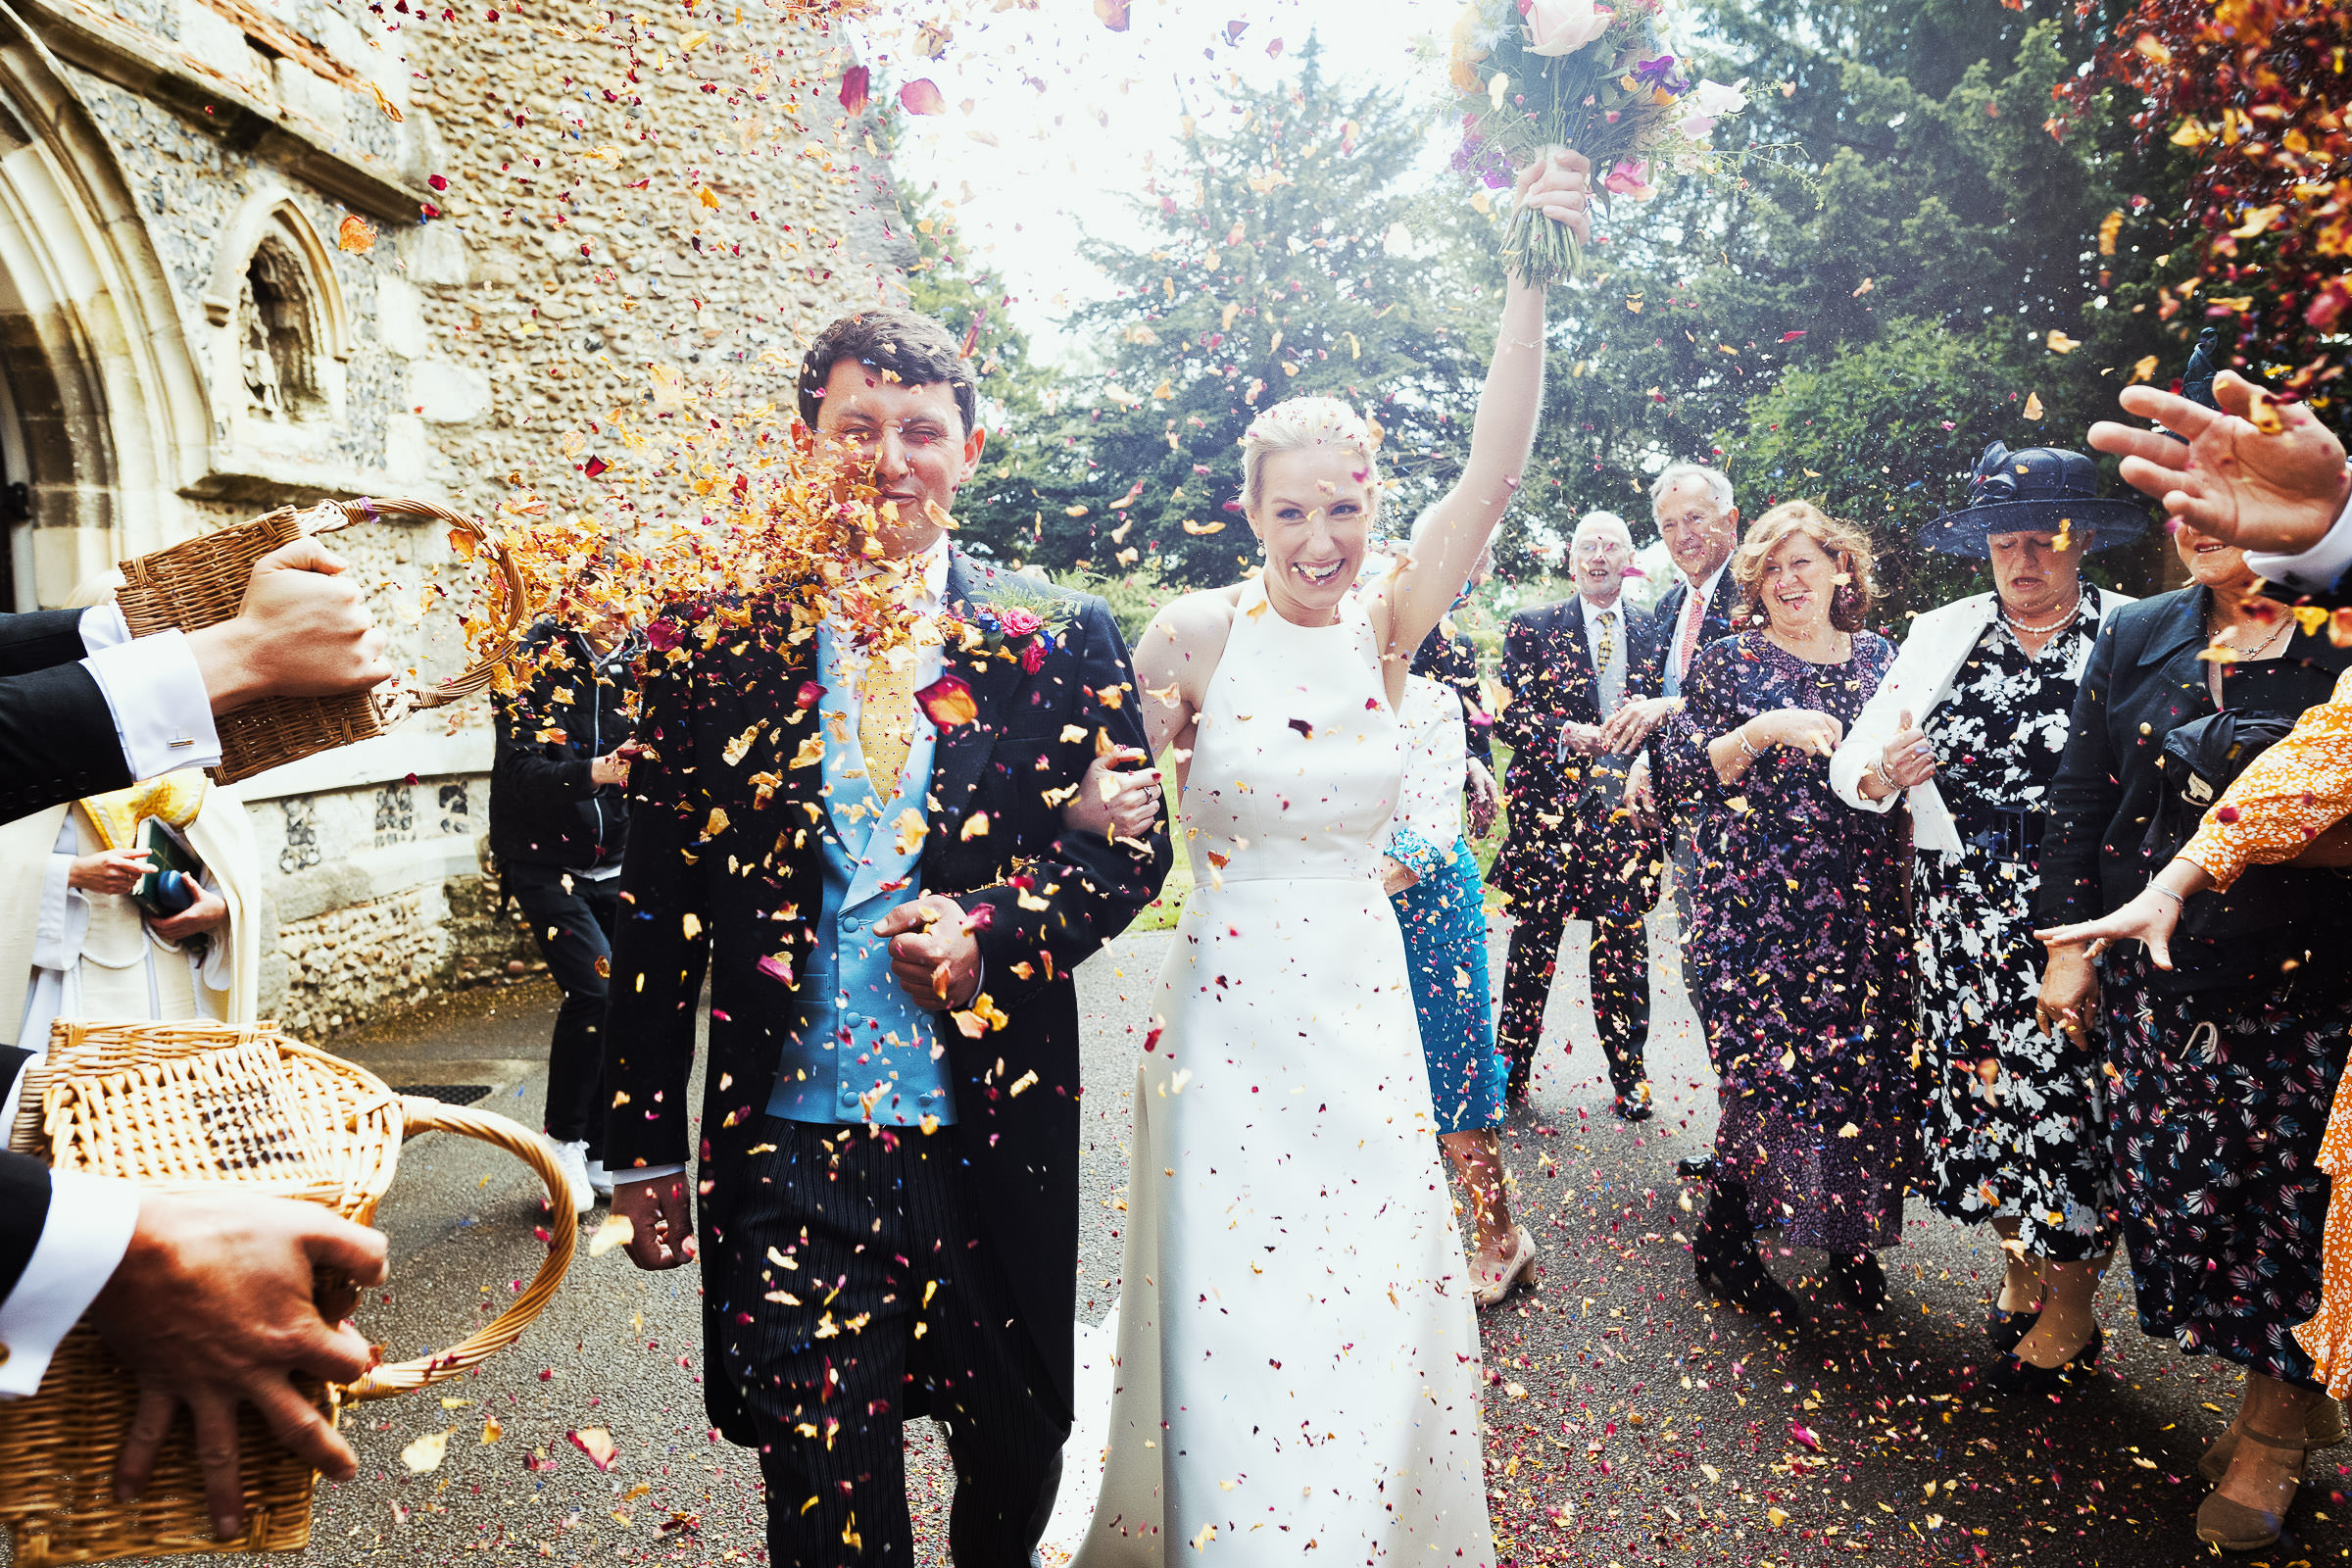 A basket of confetti thrown in the groom's face outside the church in Danbury after a wedding. Essex wedding photography.